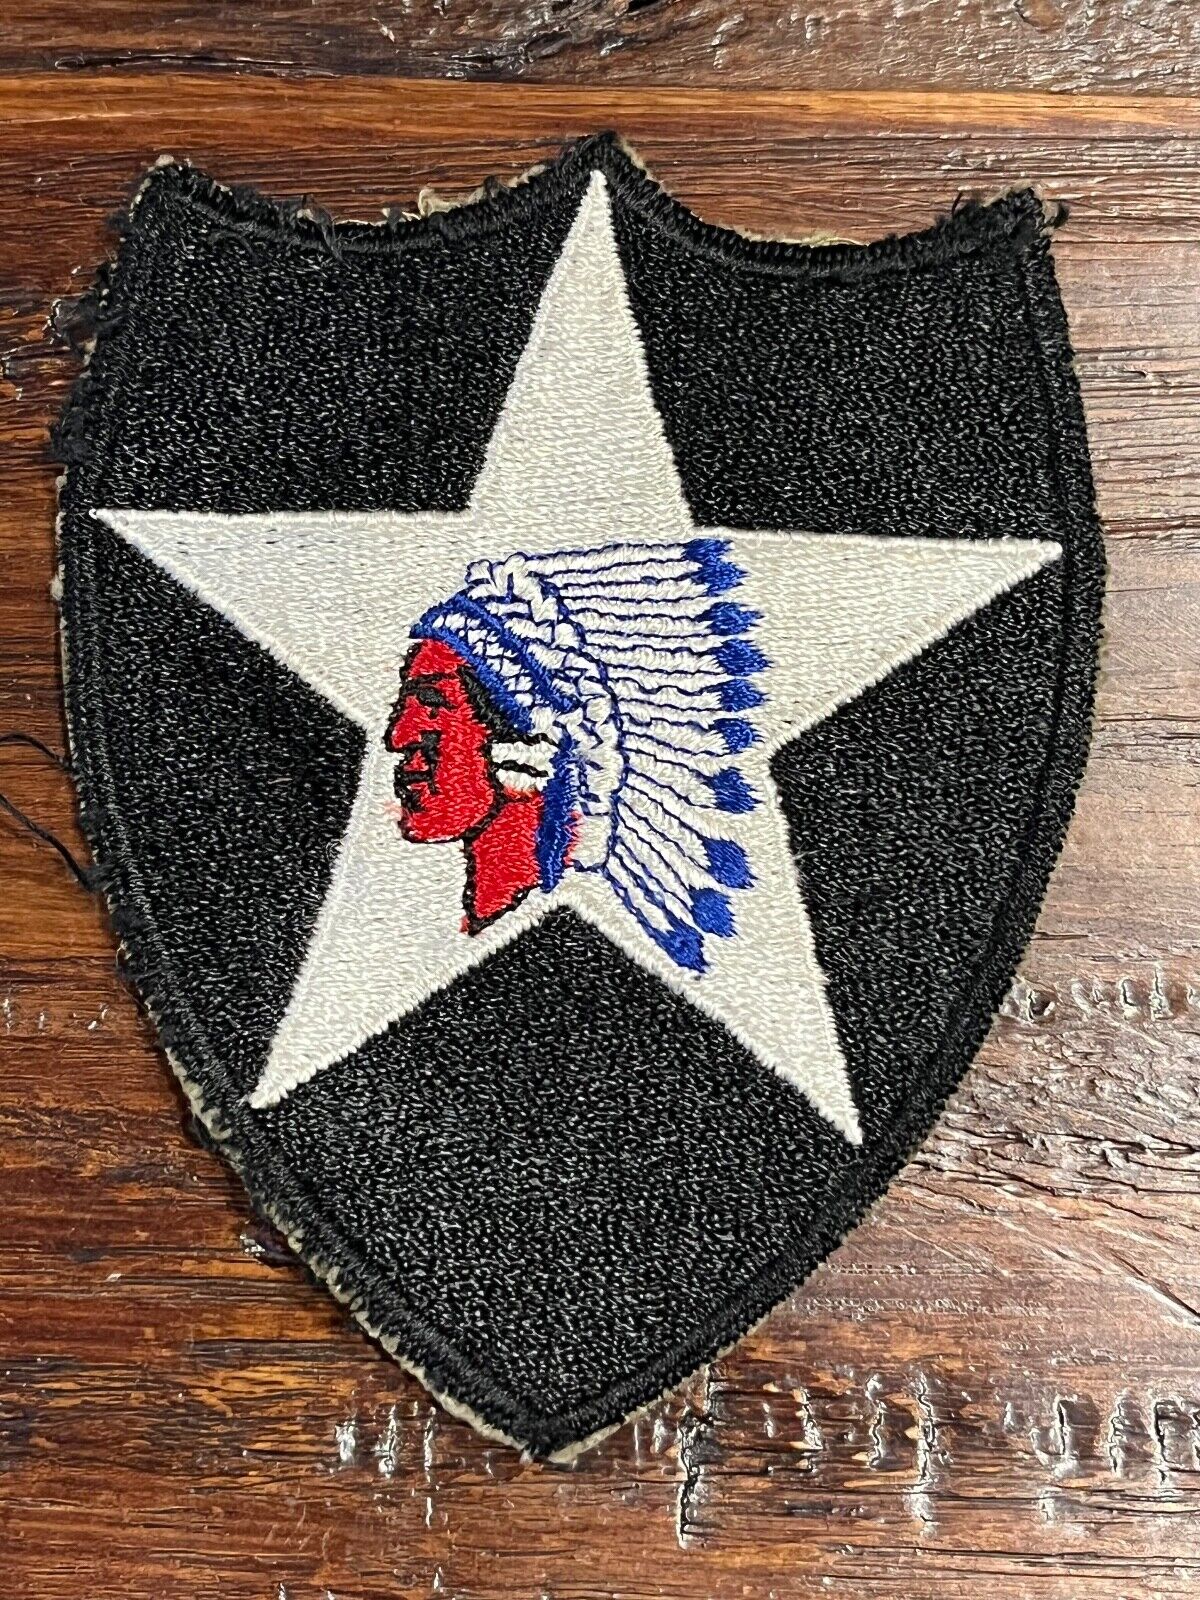 ORIGINAL PERIOD WWII WW2 US ARMY 2ND INFANTRY DIVISION PATCH - FE CE 10 FEATHER